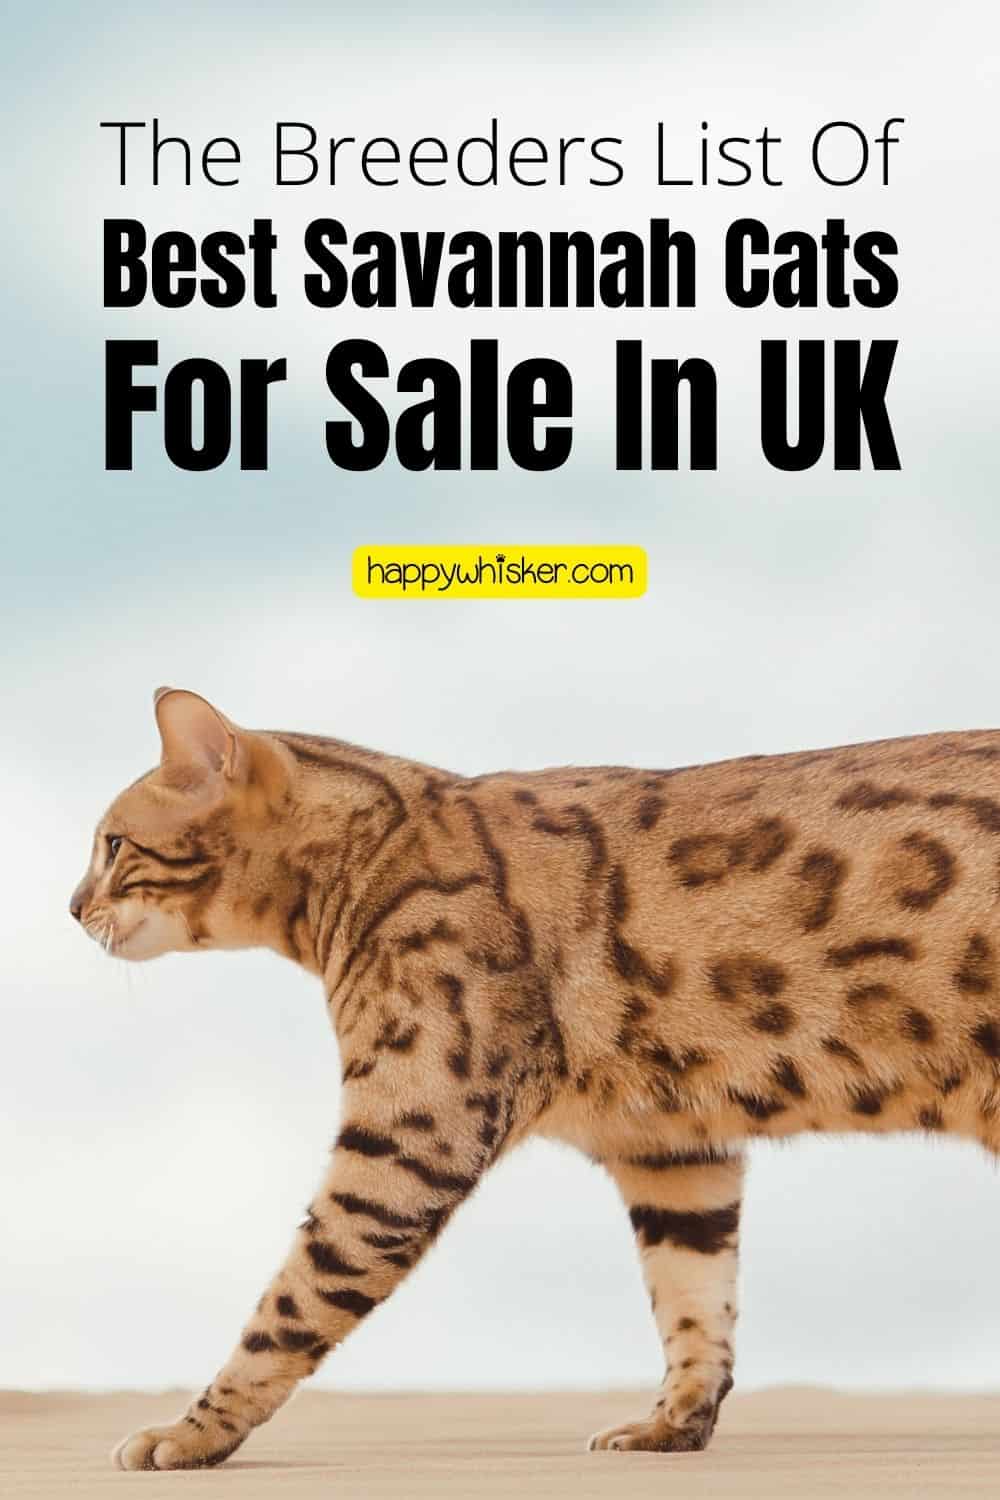 The Breeders List Of Best Savannah Cats For Sale In UK Pinterest